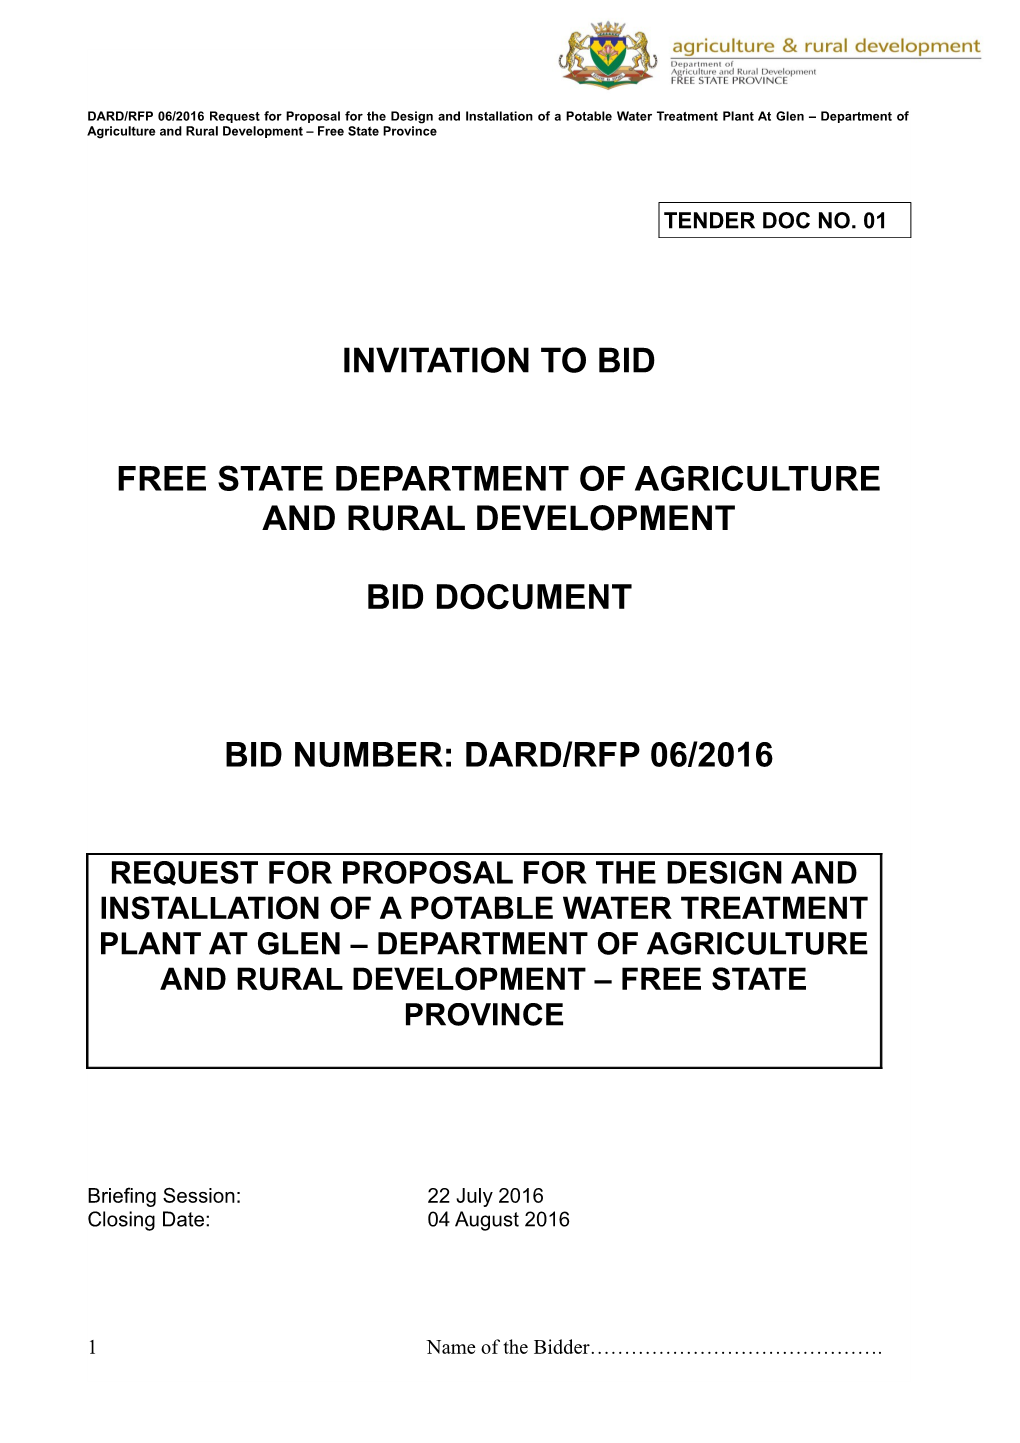 Free State Department of Agriculture and Rural Development